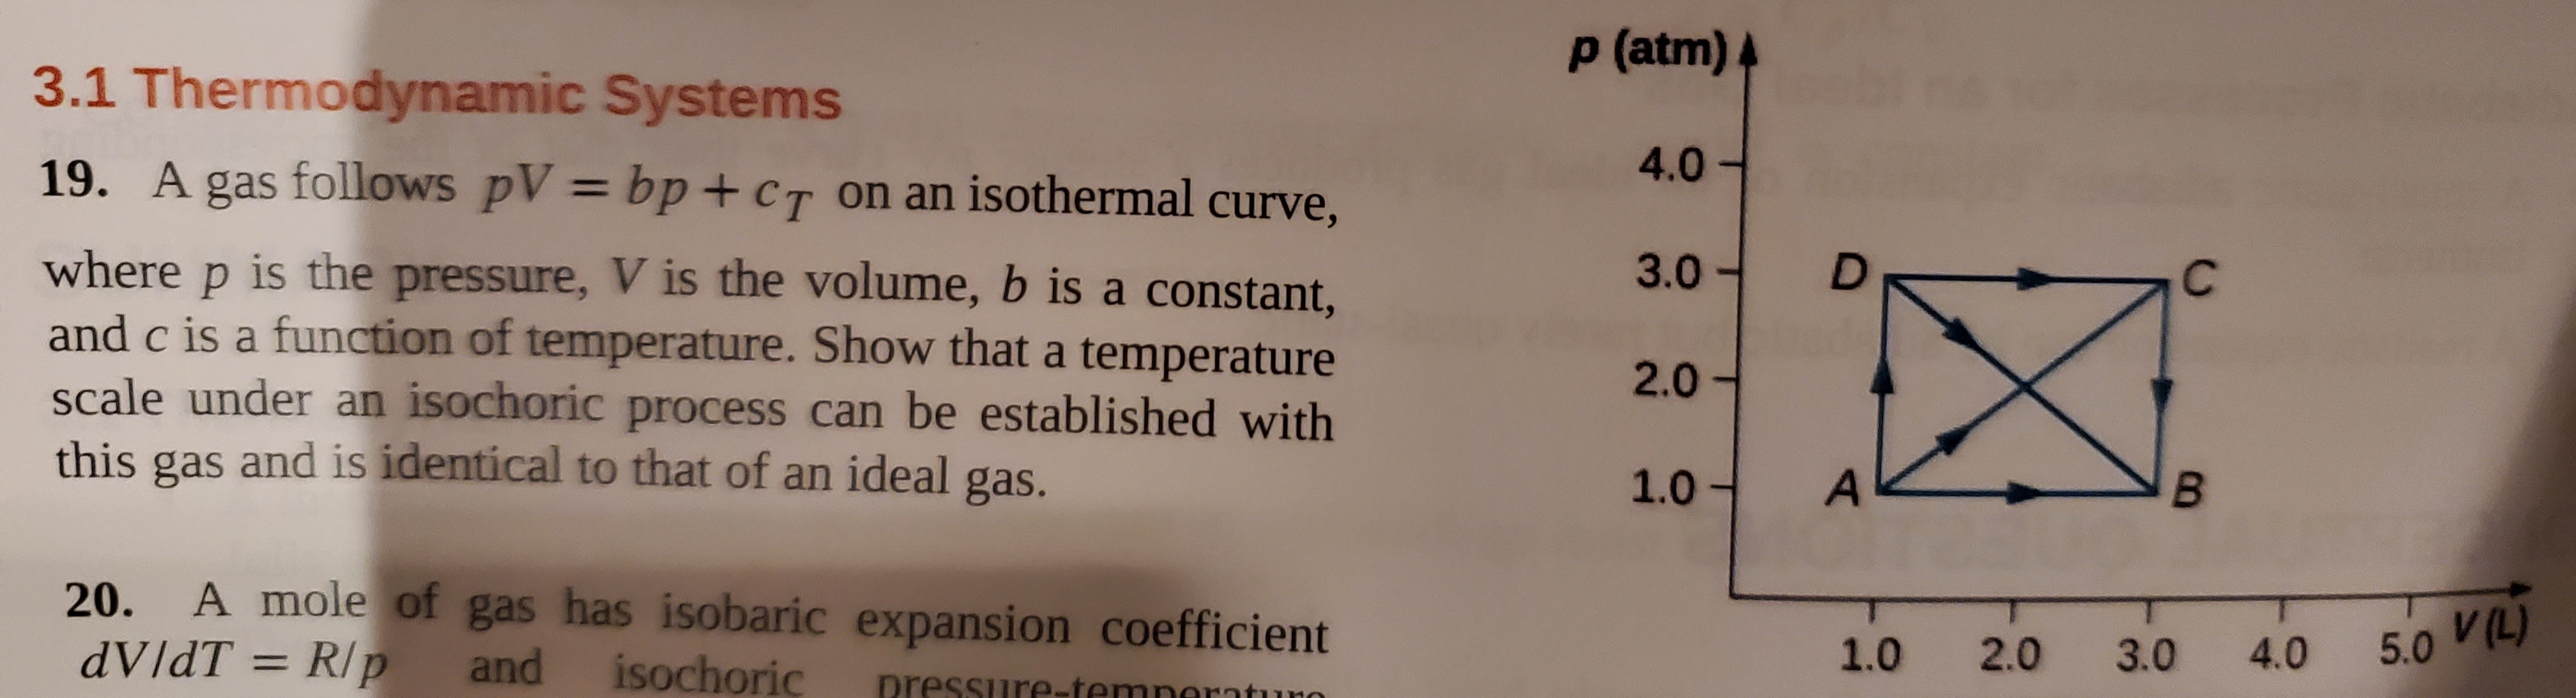 19. A gas follows pV = bp+cT on an isothermal curve,
%3D
where p is the pressure, V is the volume, b is a constant,
and c is a function of temperature. Show that a temperature
scale under an isochoric process can be established with
this gas and is identical to that of an ideal gas.
